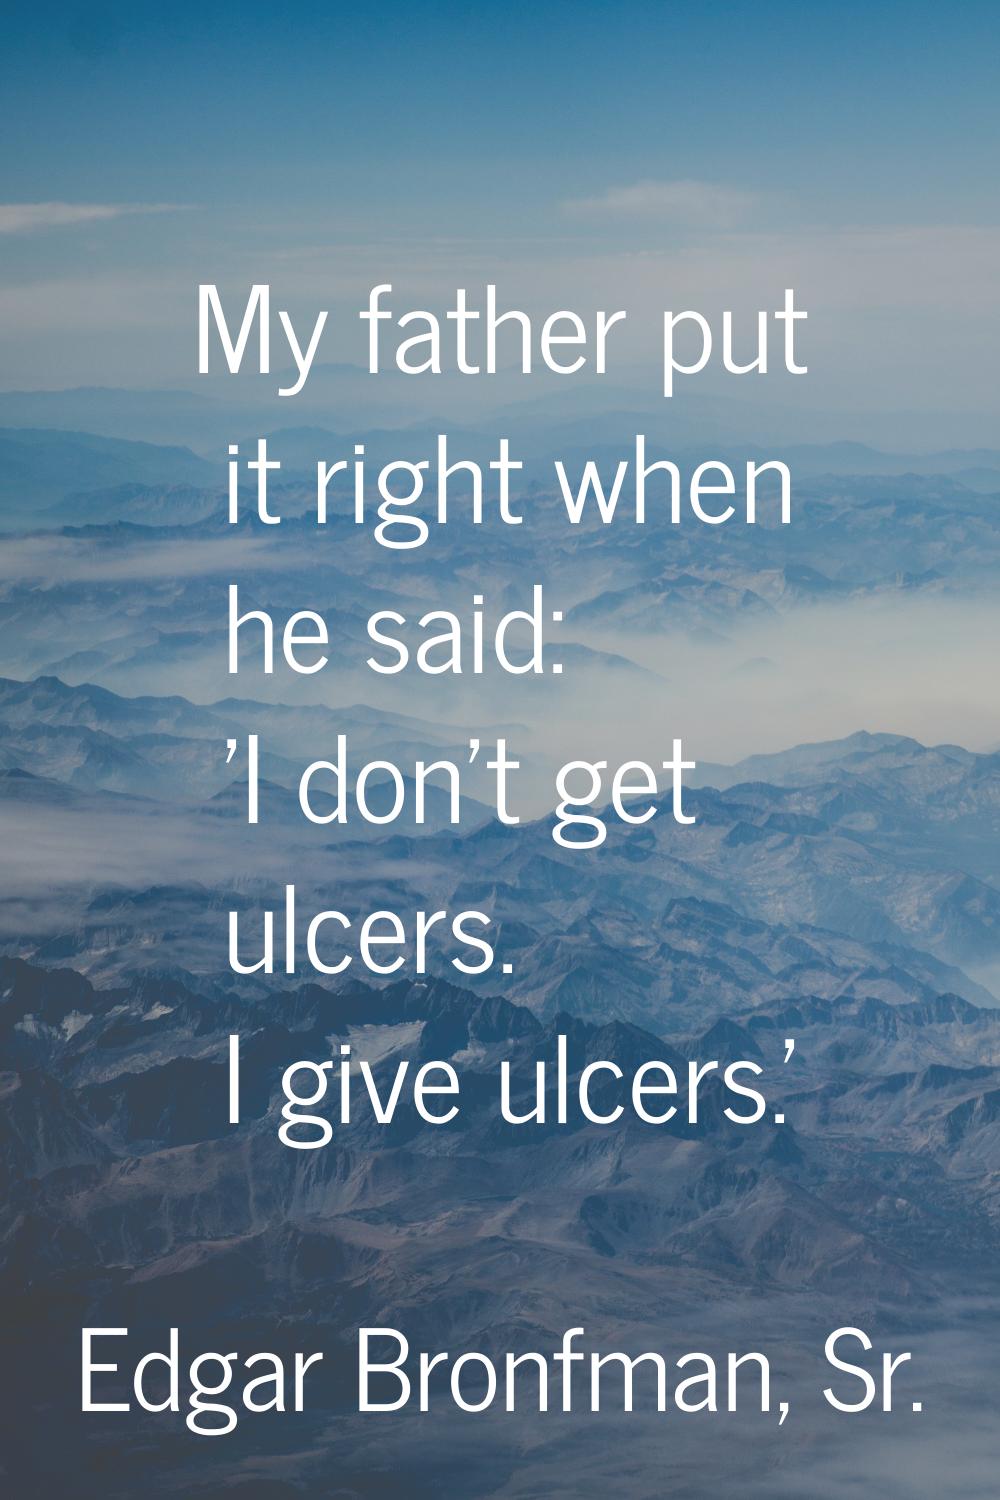 My father put it right when he said: 'I don't get ulcers. I give ulcers.'